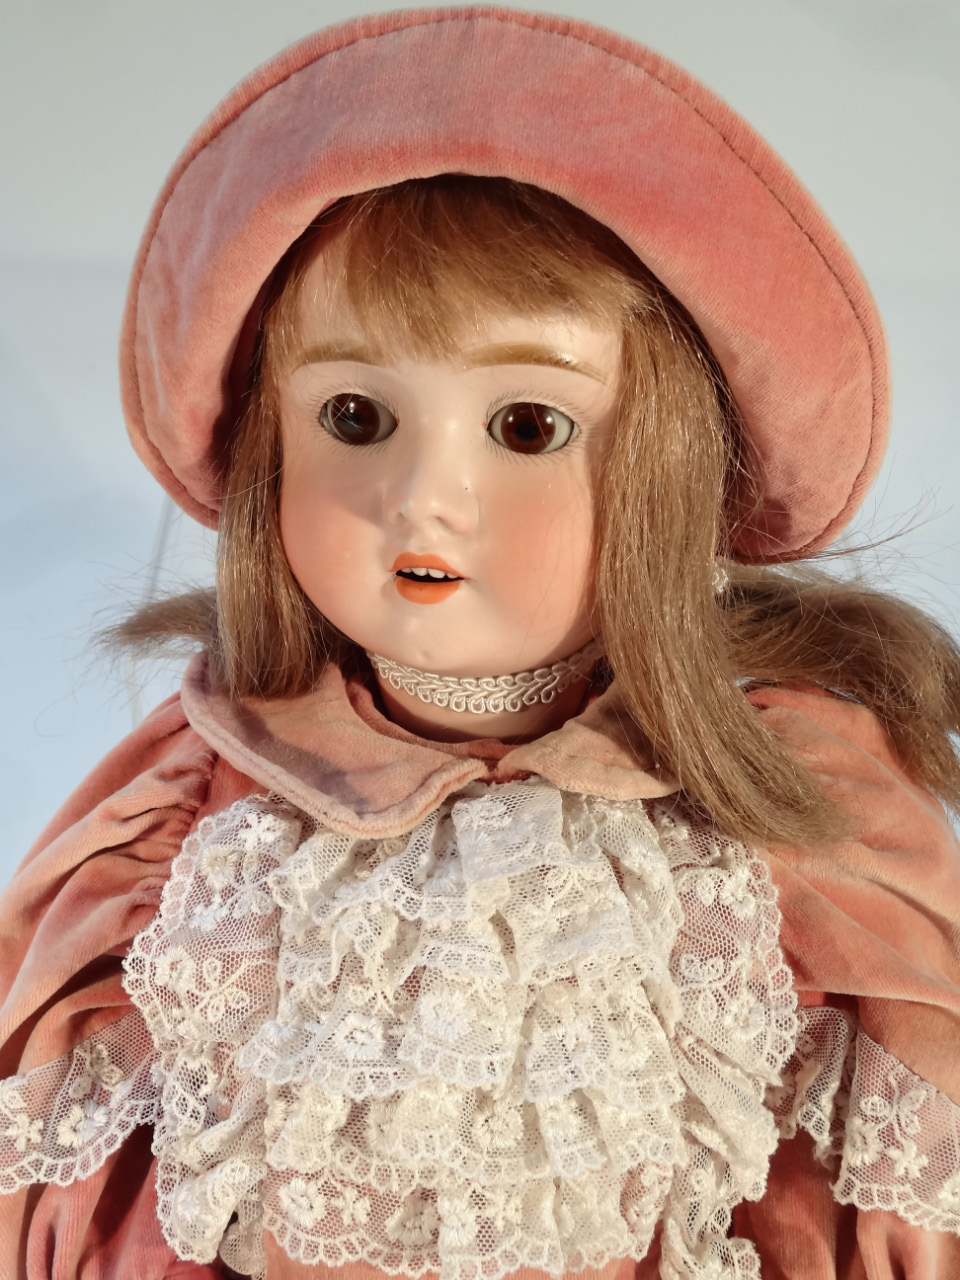 A late 19thC German Viola bisque headed doll, with blonde hair, blink eyes, open mouth showing - Image 2 of 3